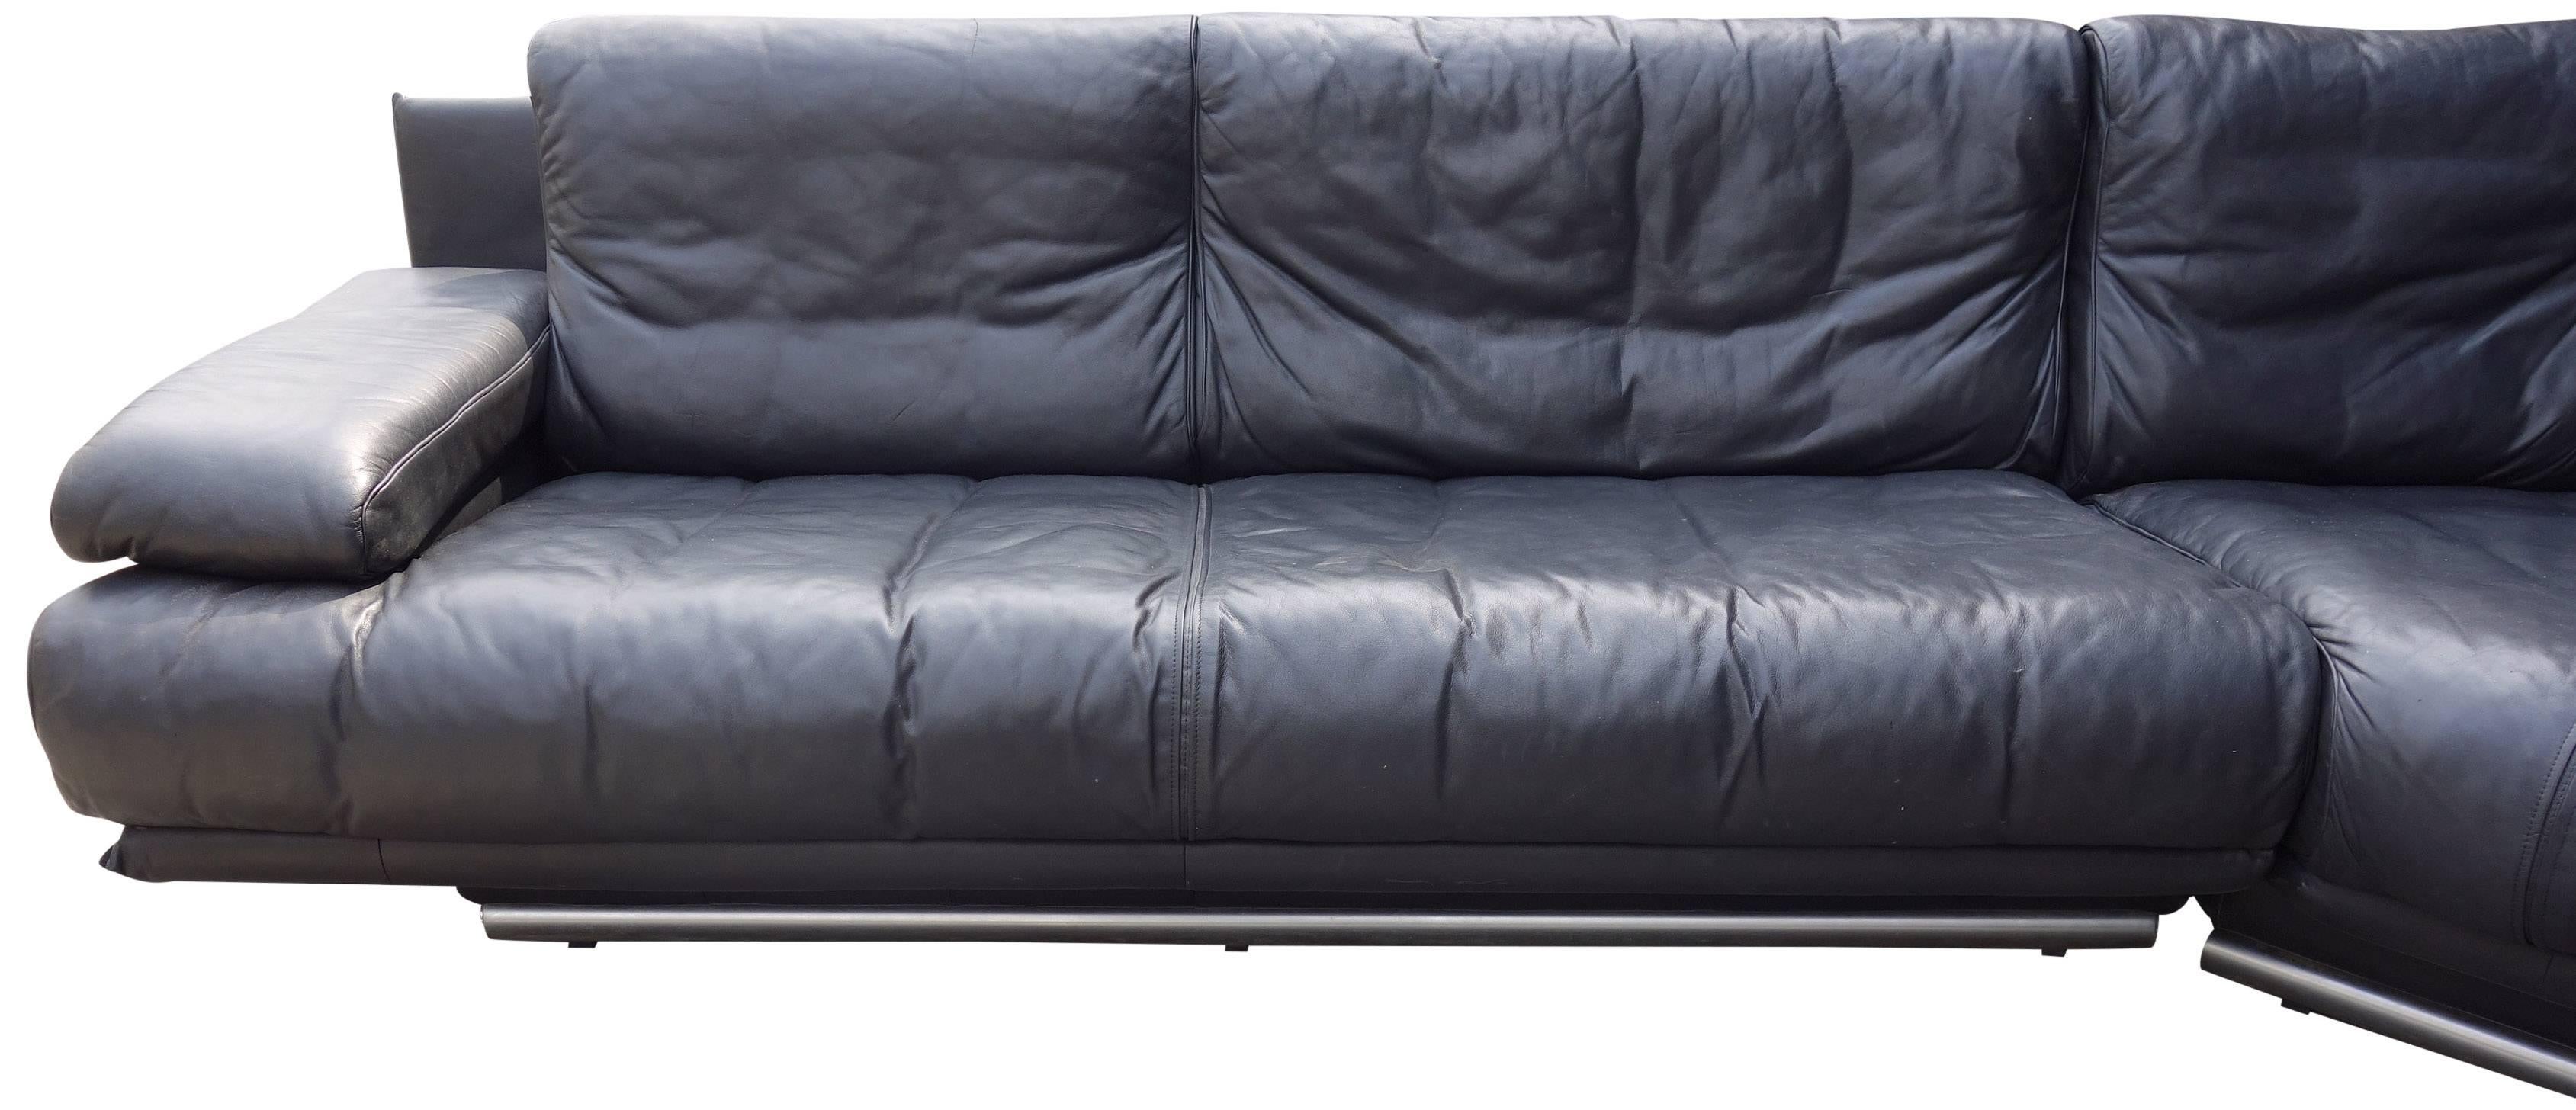 20th Century Midcentury Leather Sectional Sofa